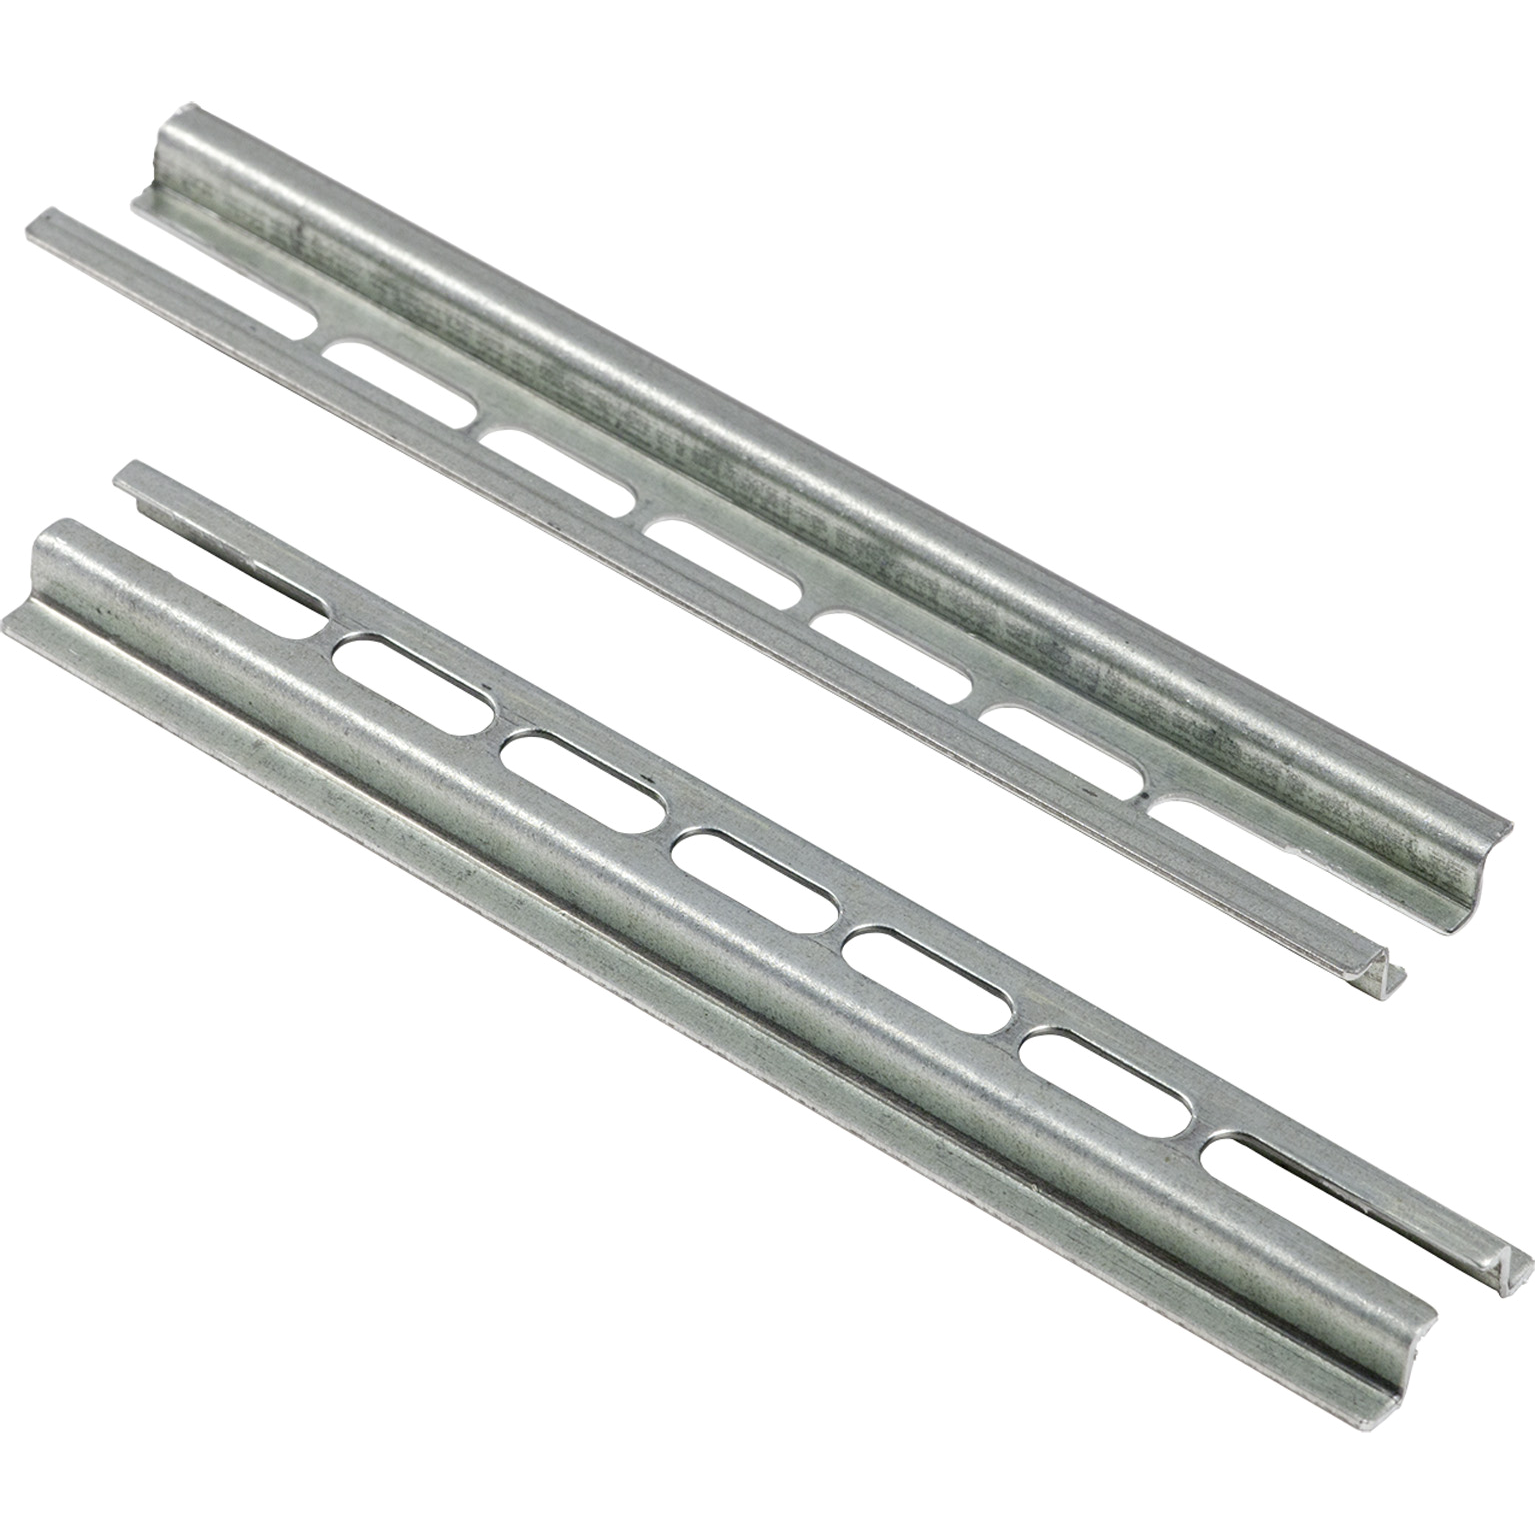 Terminal block, Linergy, standard Square D mounting track, 5 inches long